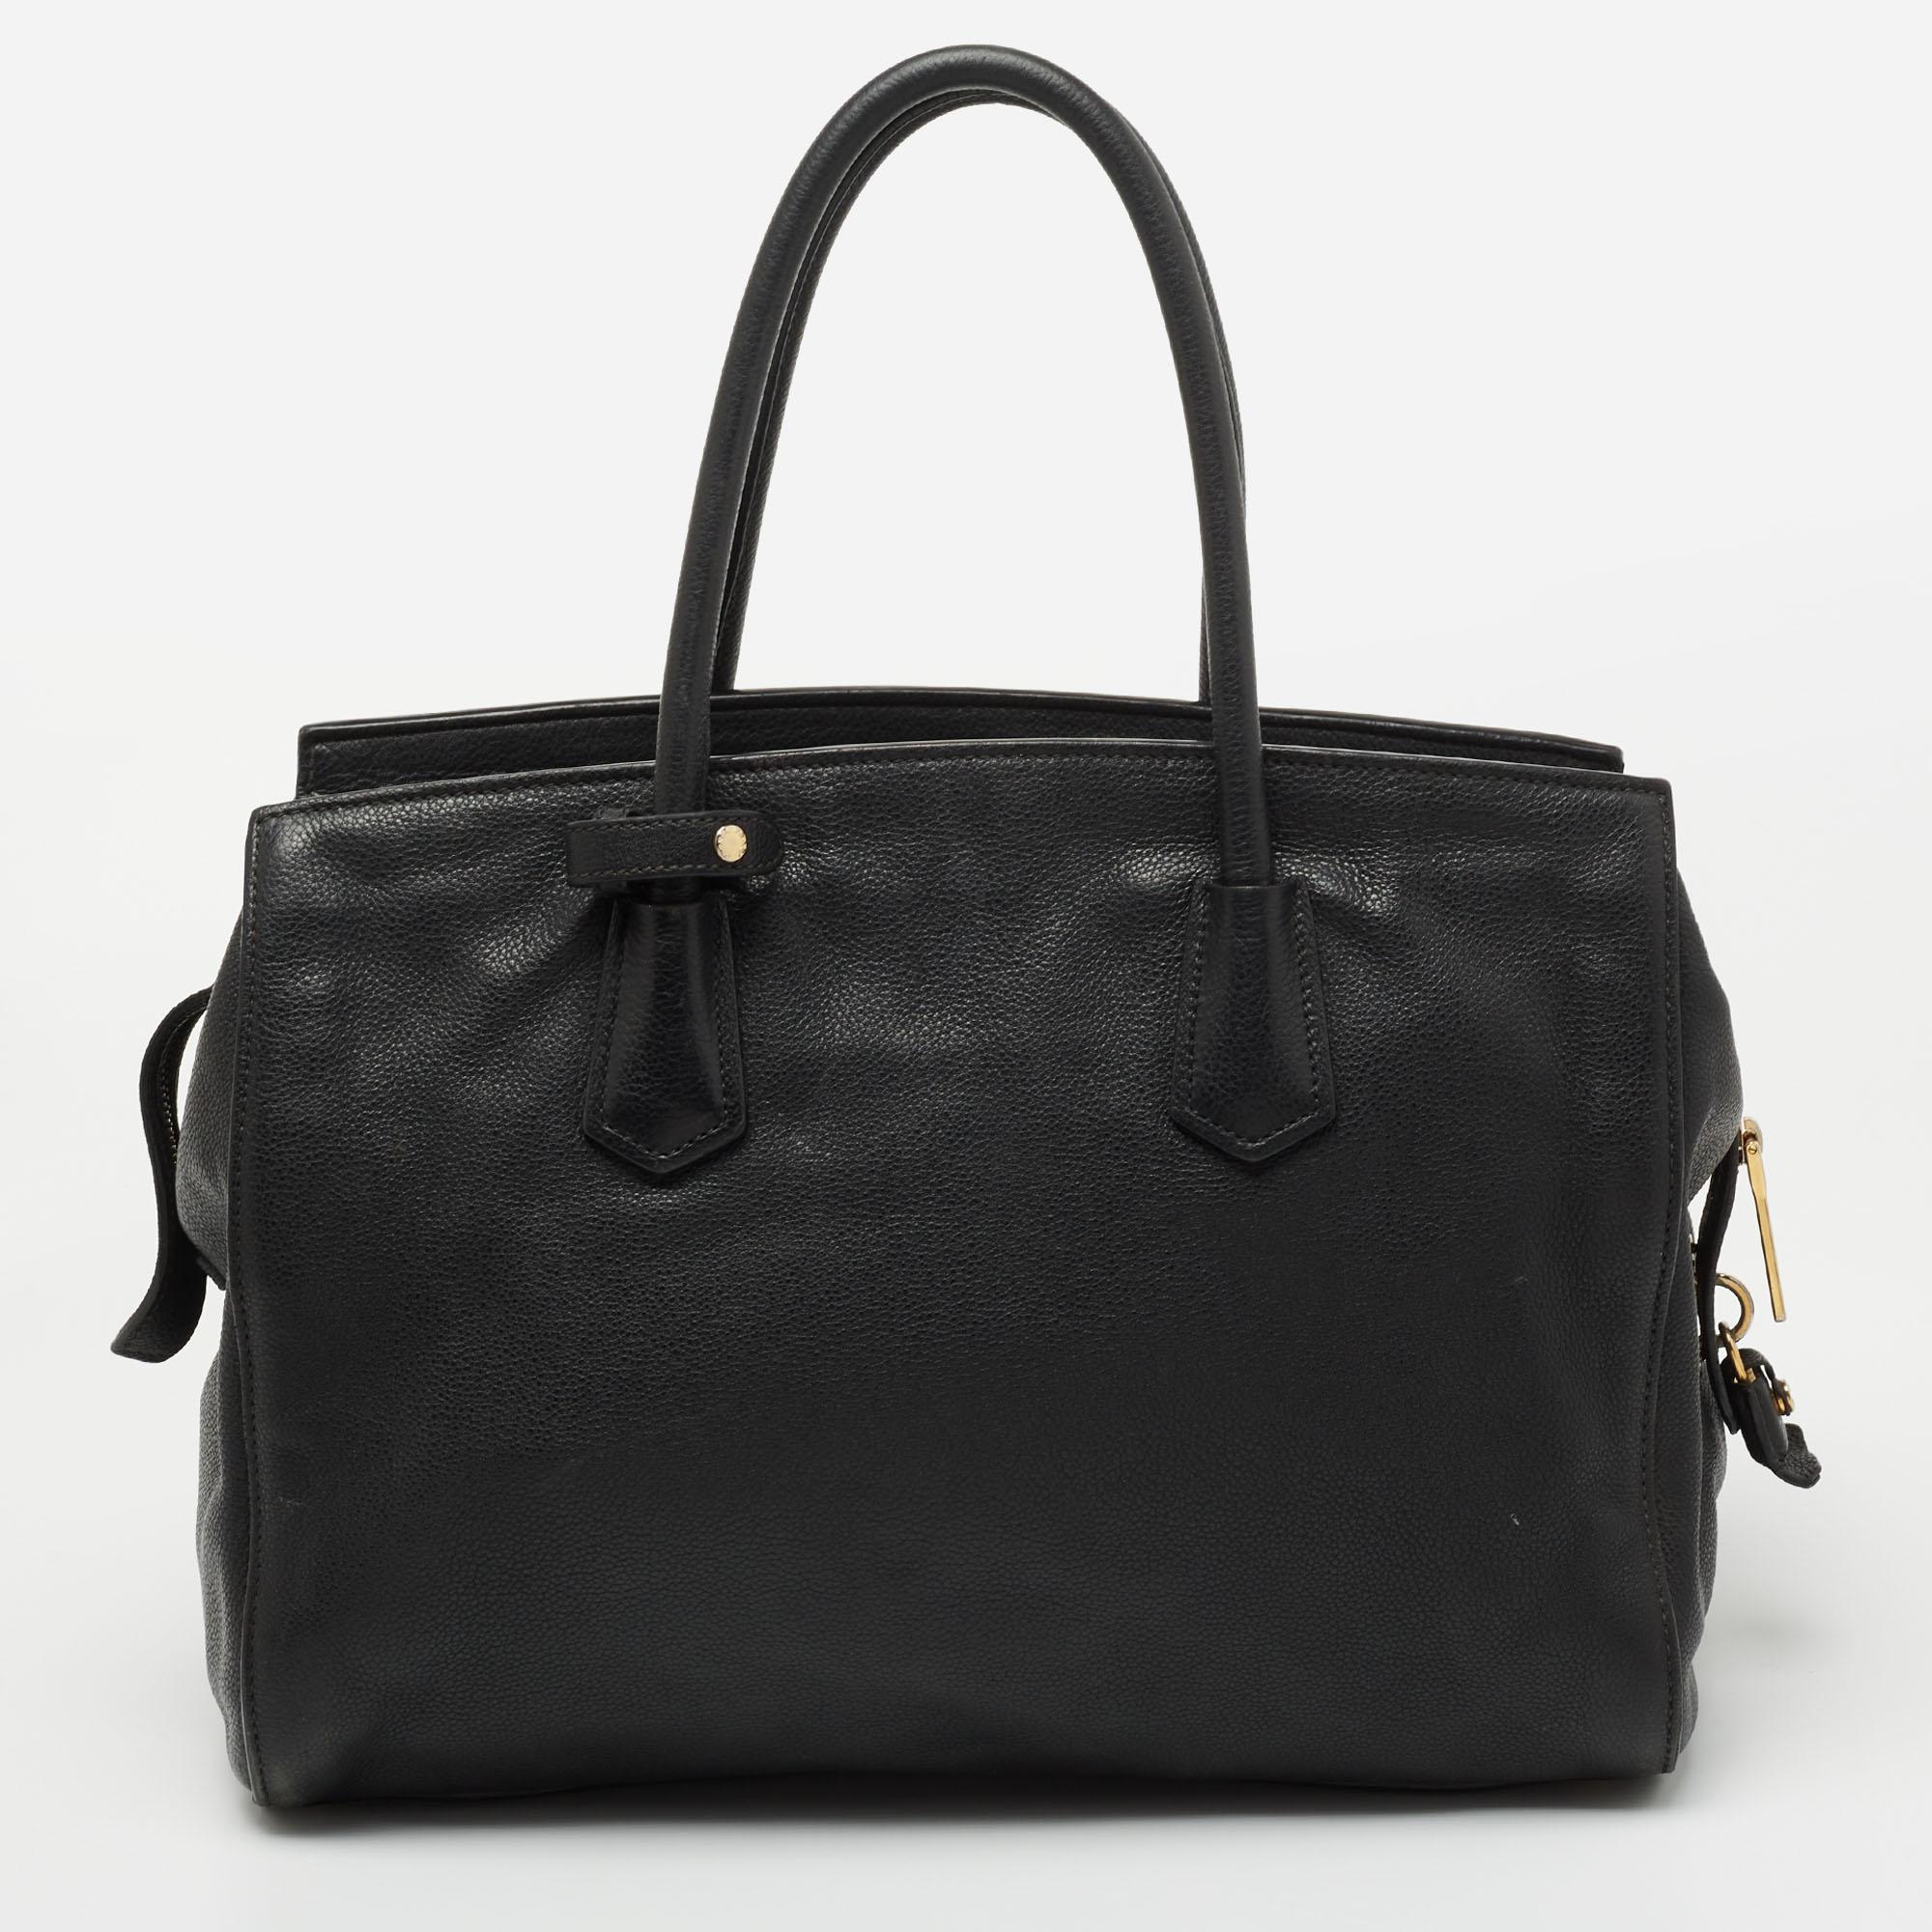 Be it your daily commute to work, shopping sprees, and vacations, a tote bag will never fail you. This designer creation is made to last and assist you in your fashion-filled days.

Includes: Padlock and Key